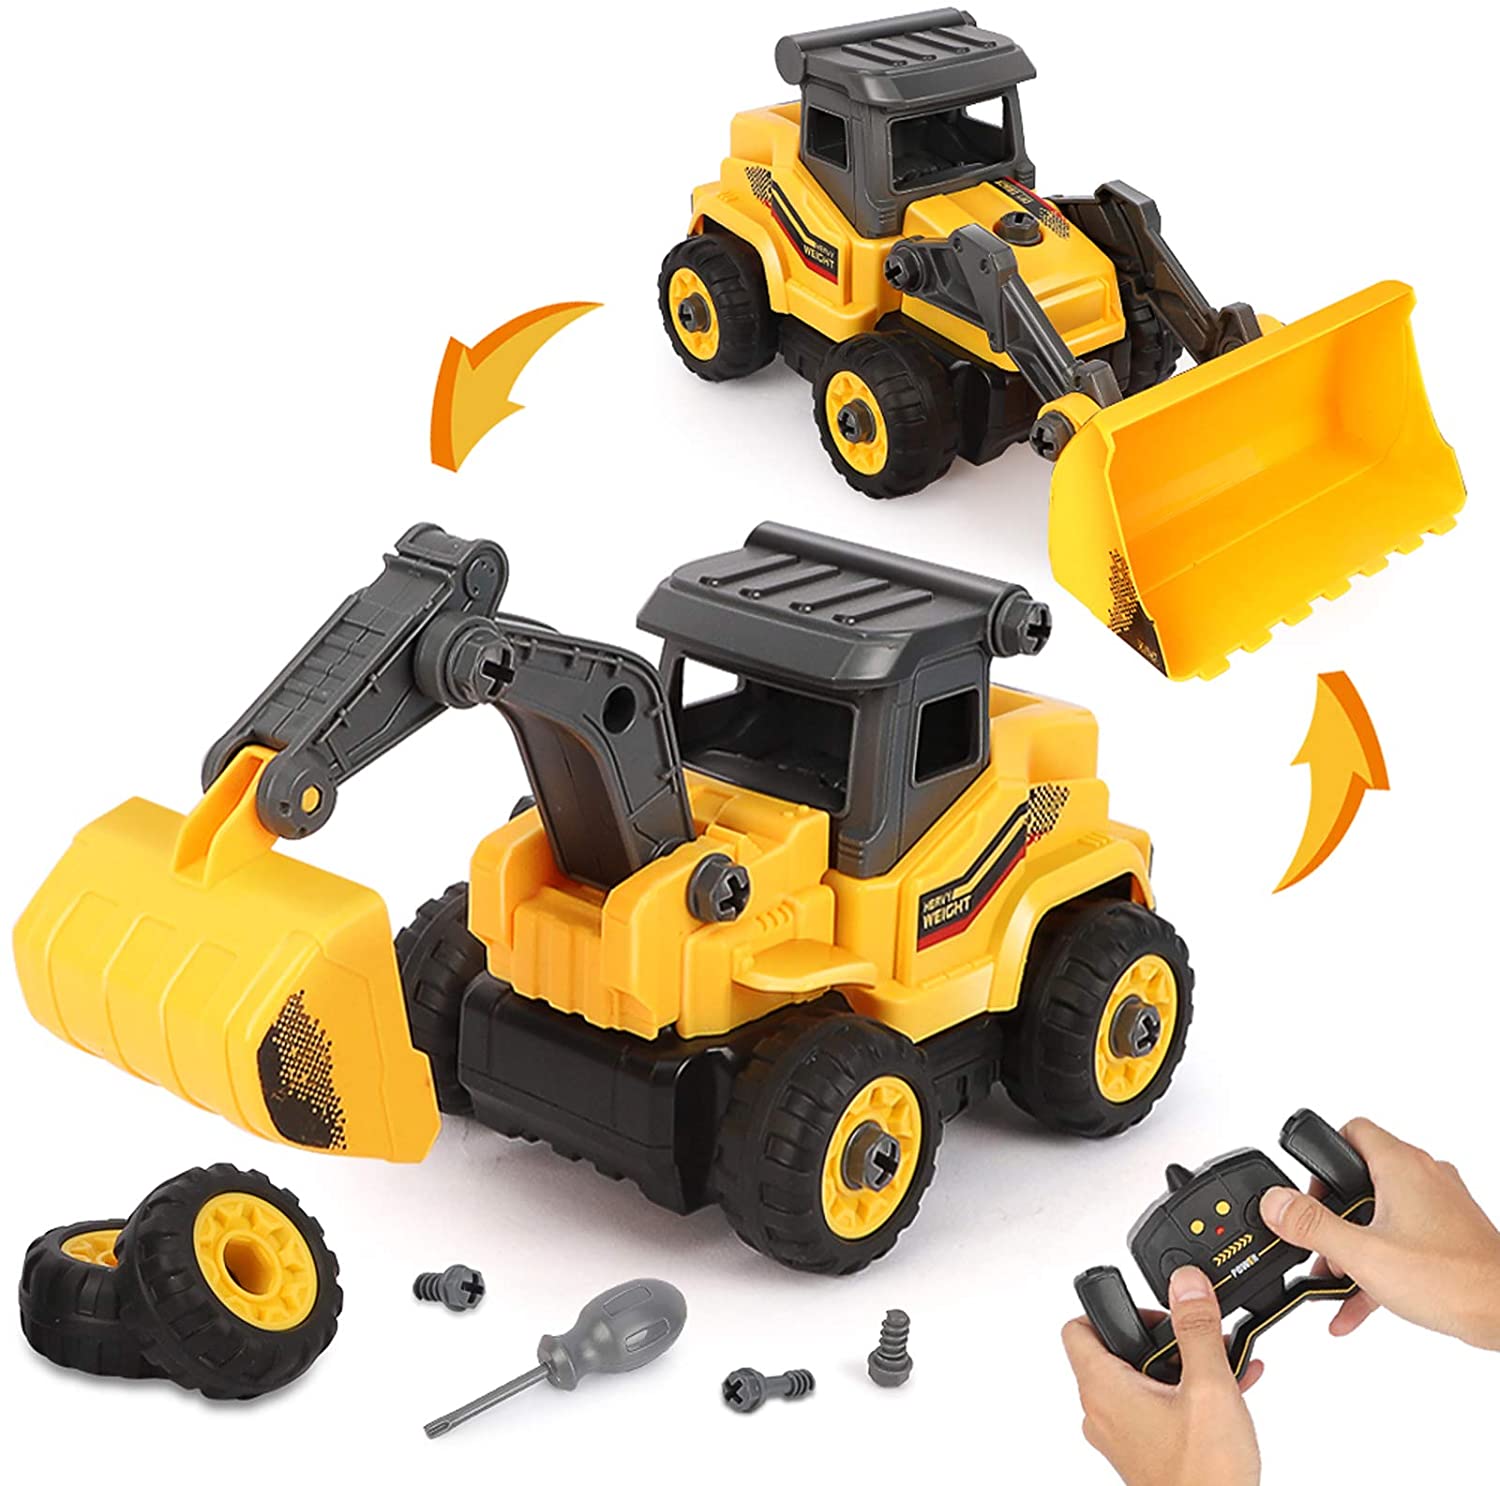 Construction Trucks for Boys - 2 in 1 RC Construction Vehicles - Take Apart Construction Toys - Remote Control Excavator and Bulldozer Toys for Boys, Gift for 3 4 5 6 7 Year Old Boy & Kid - image 1 of 8